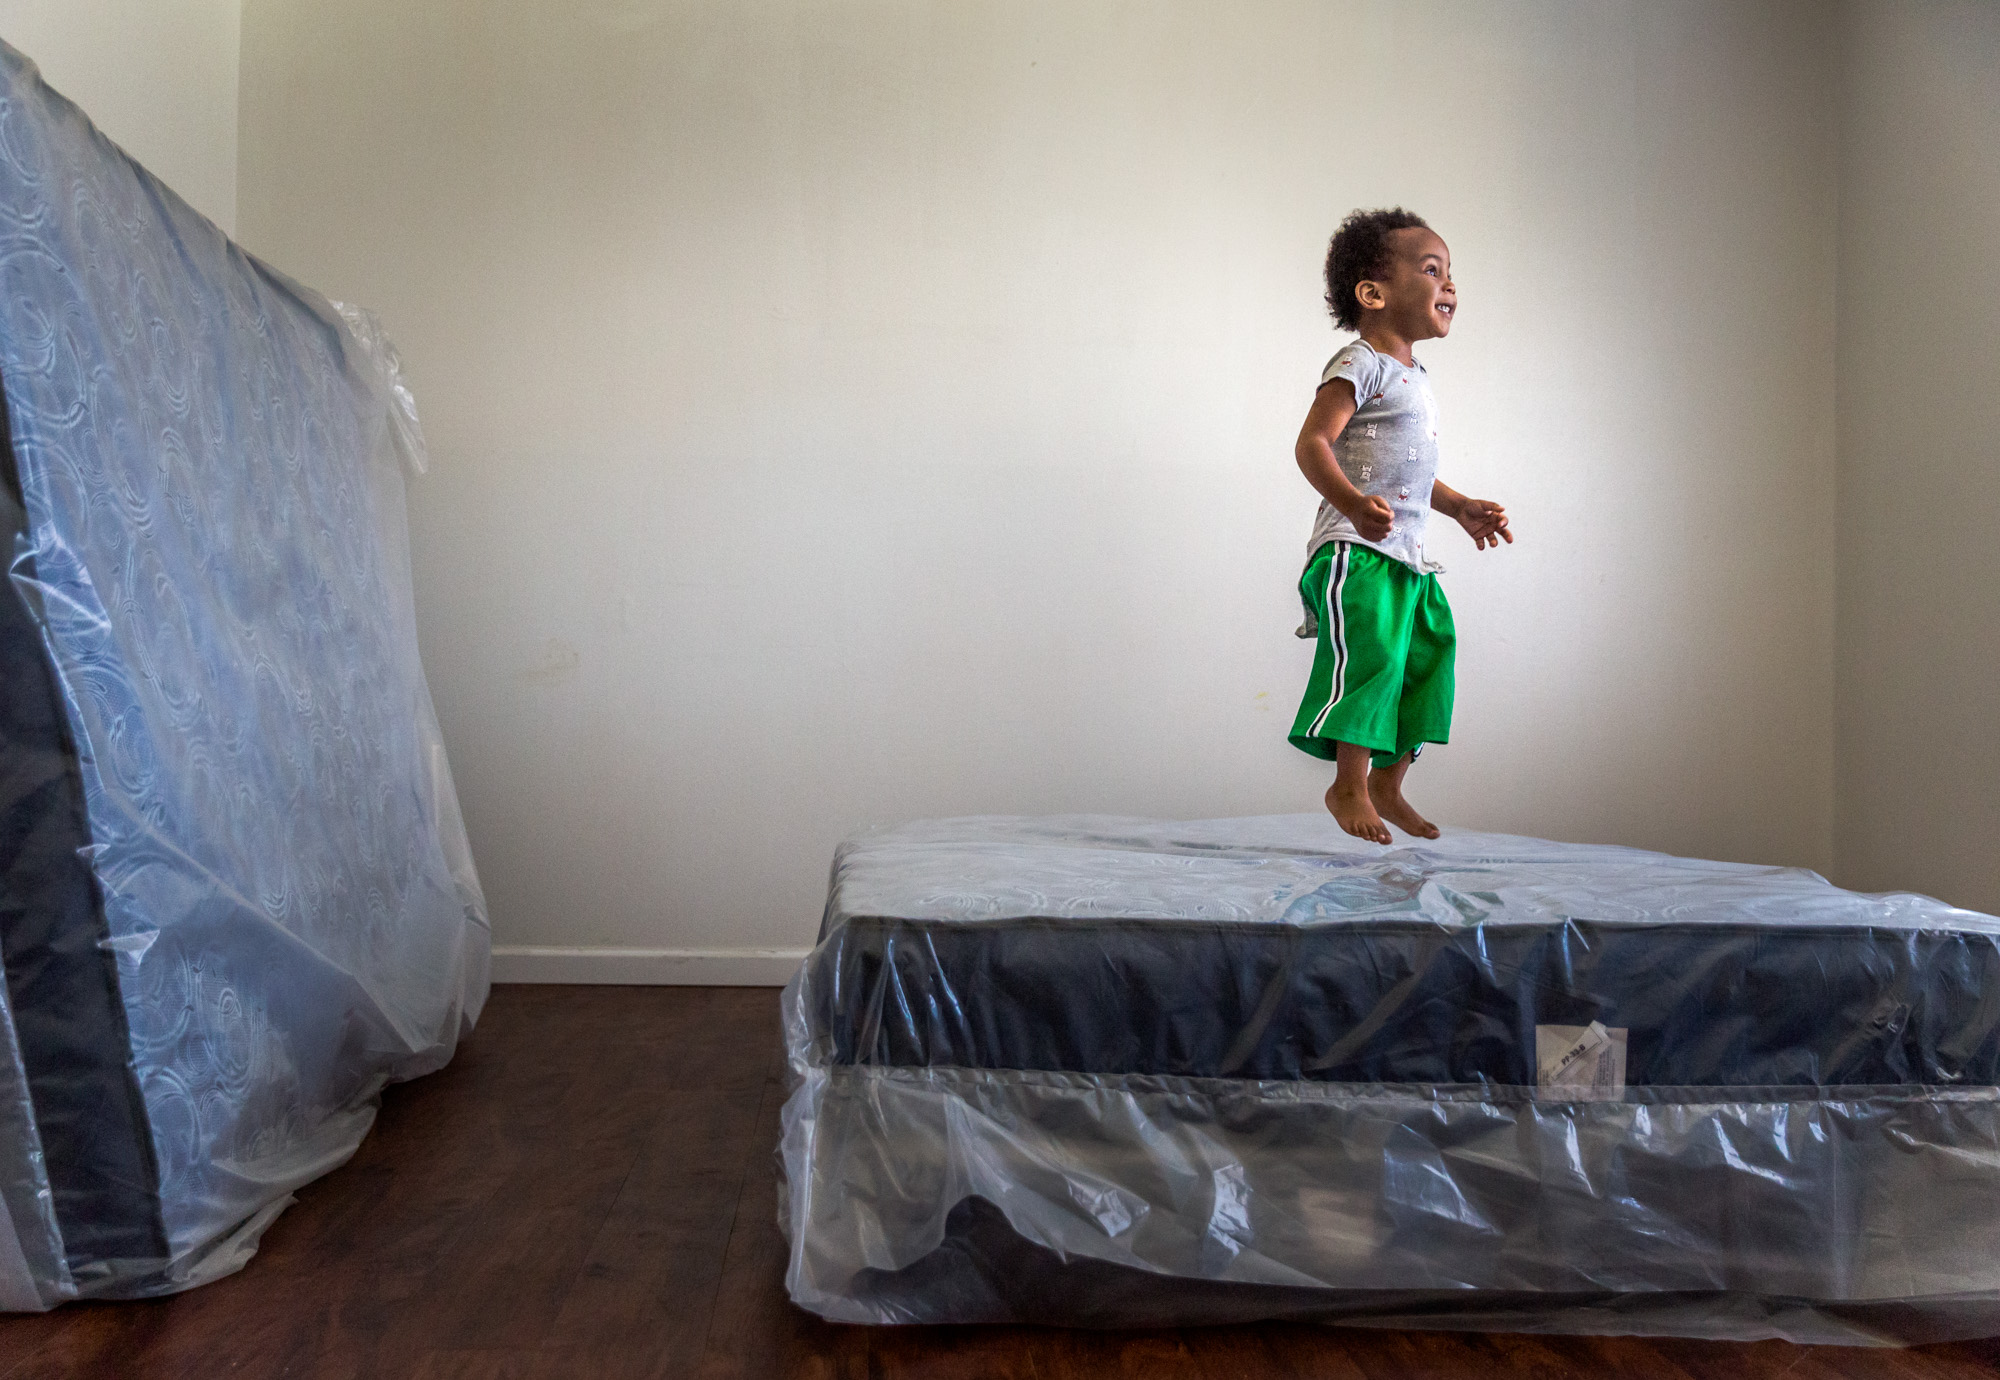 Ja’zon Reece, almost 3, bounced on top of the newly delivered matresses given to his mother, Annita Baker. Prior to the delivery of the three new mattresses from St. Vincent de Paul on March 14, Baker and her three sons had been sharing an air mattress since they moved into their one-bedroom apartment.